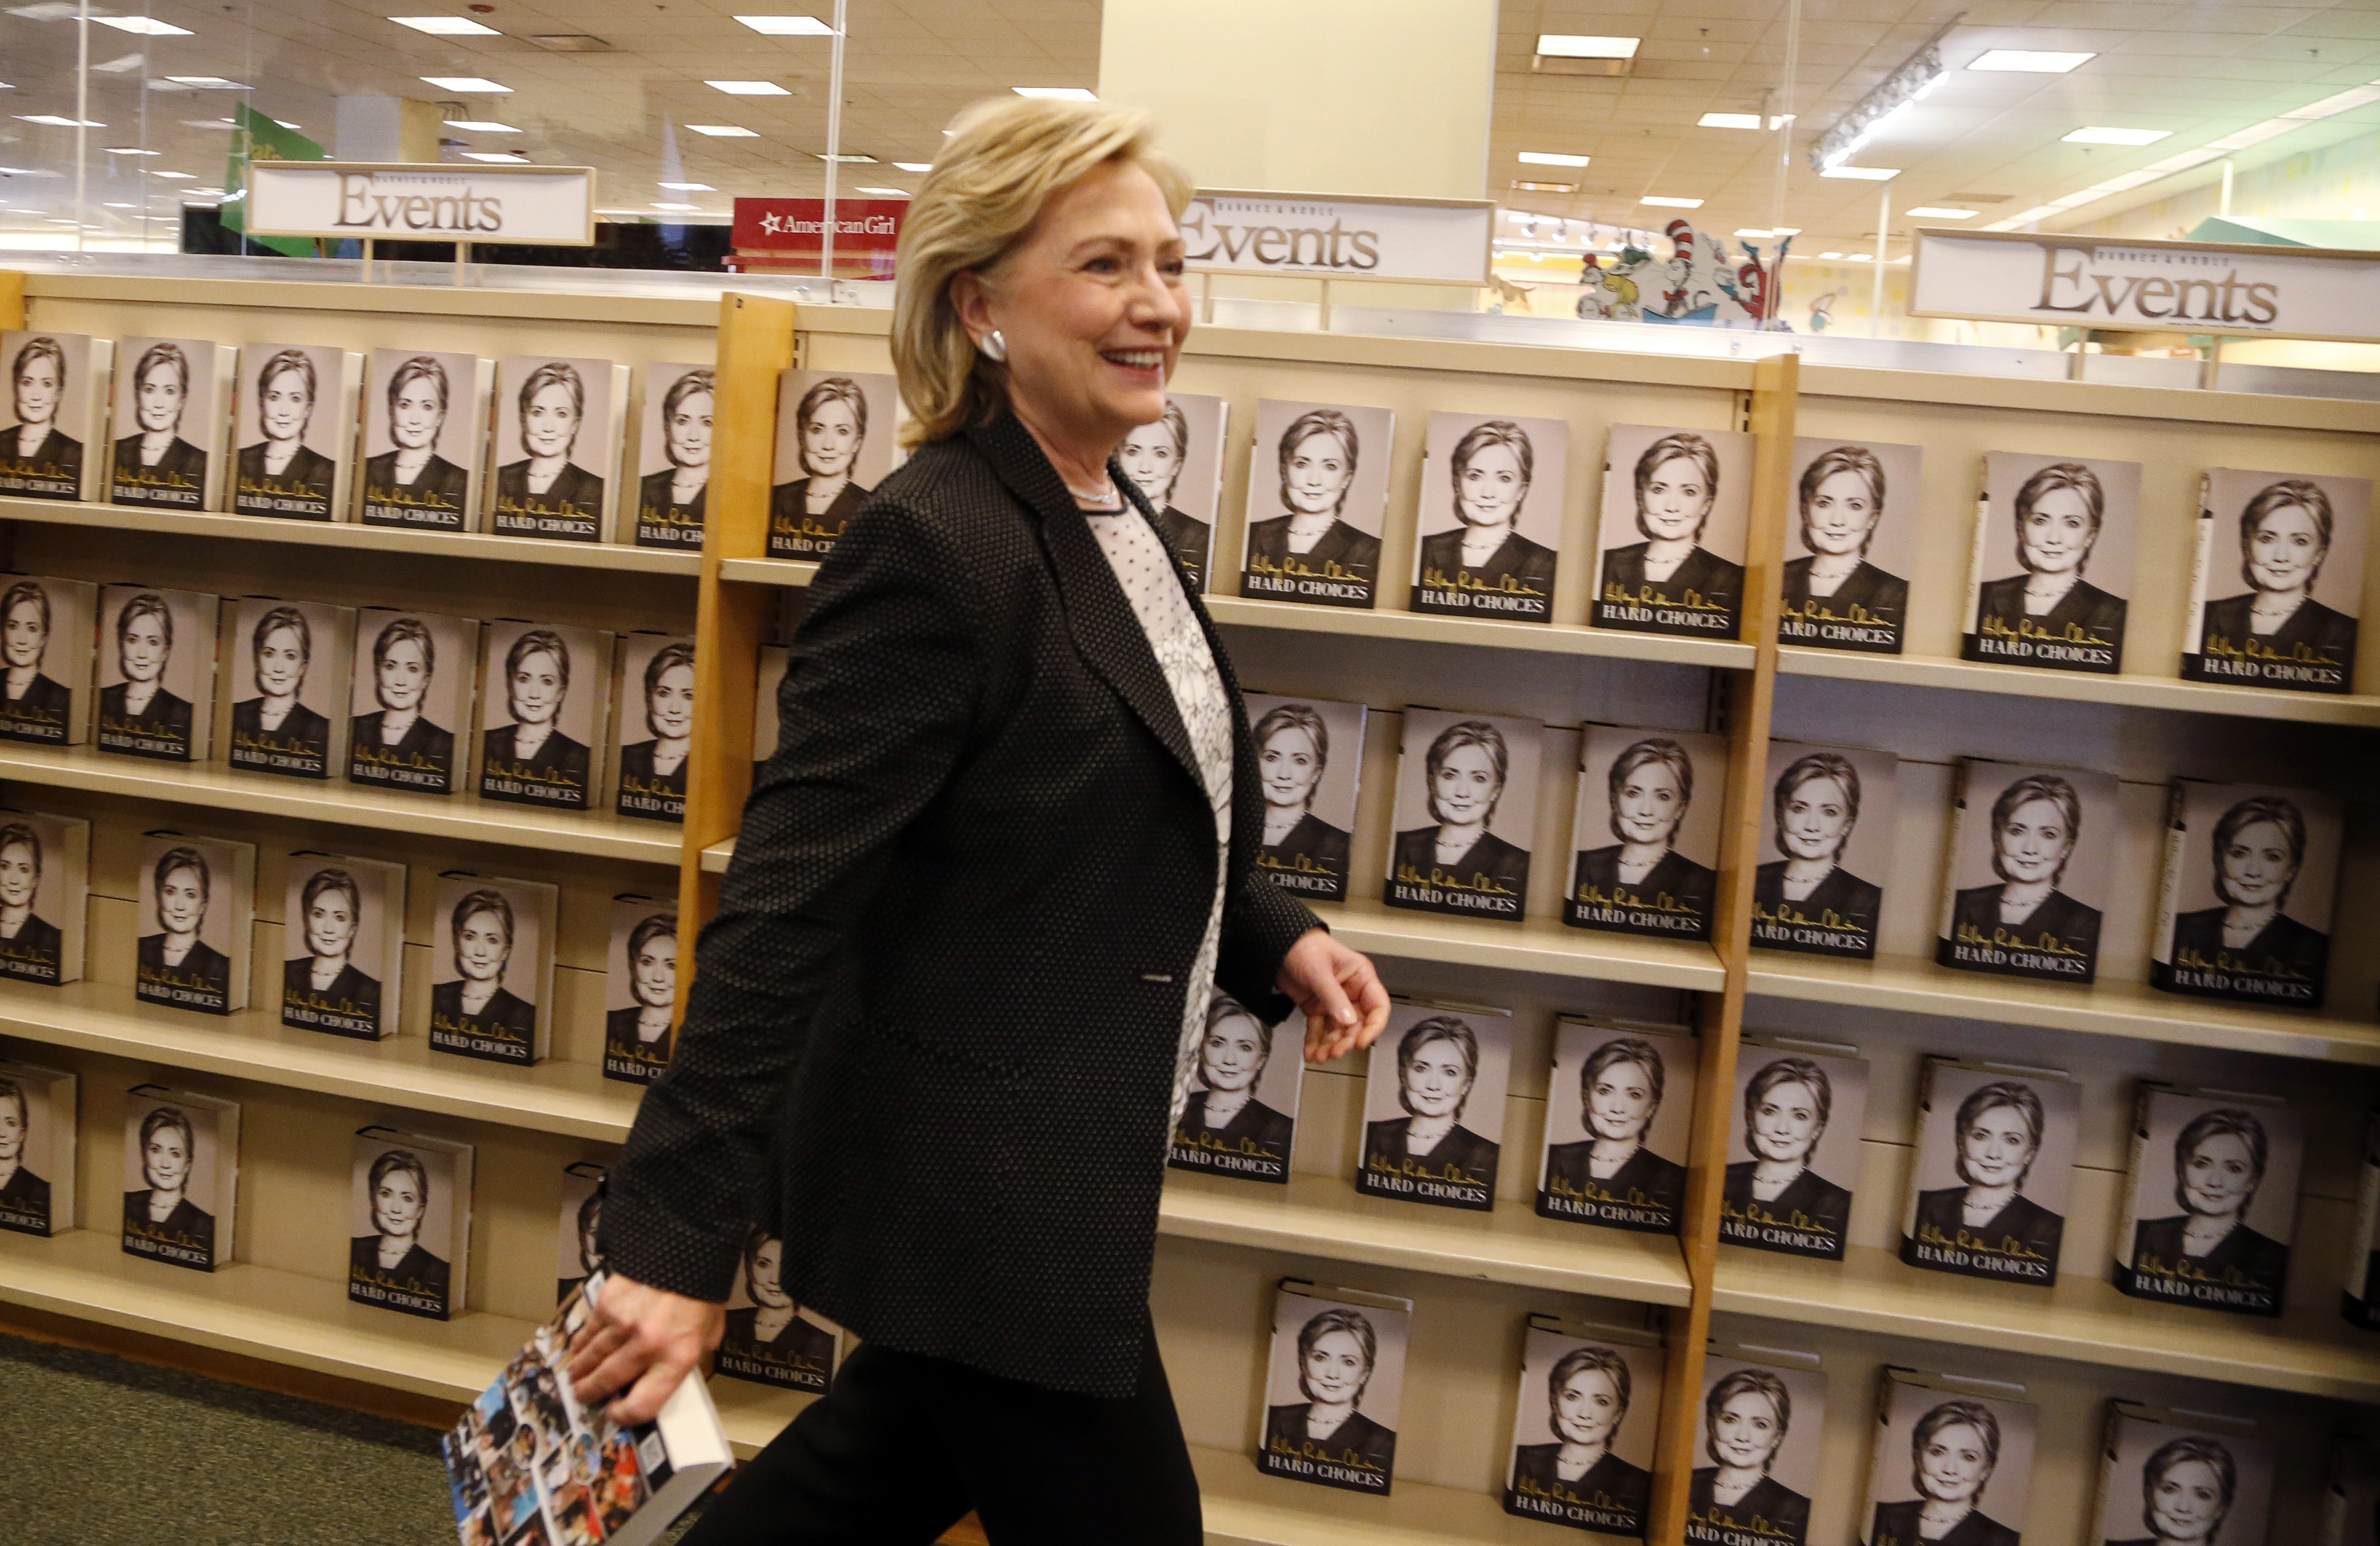 Former U.S. Secretary of State Hillary Clinton arrives to sign copies of her book "Hard Choices" at a Barnes &amp; Noble book store in Los Angeles